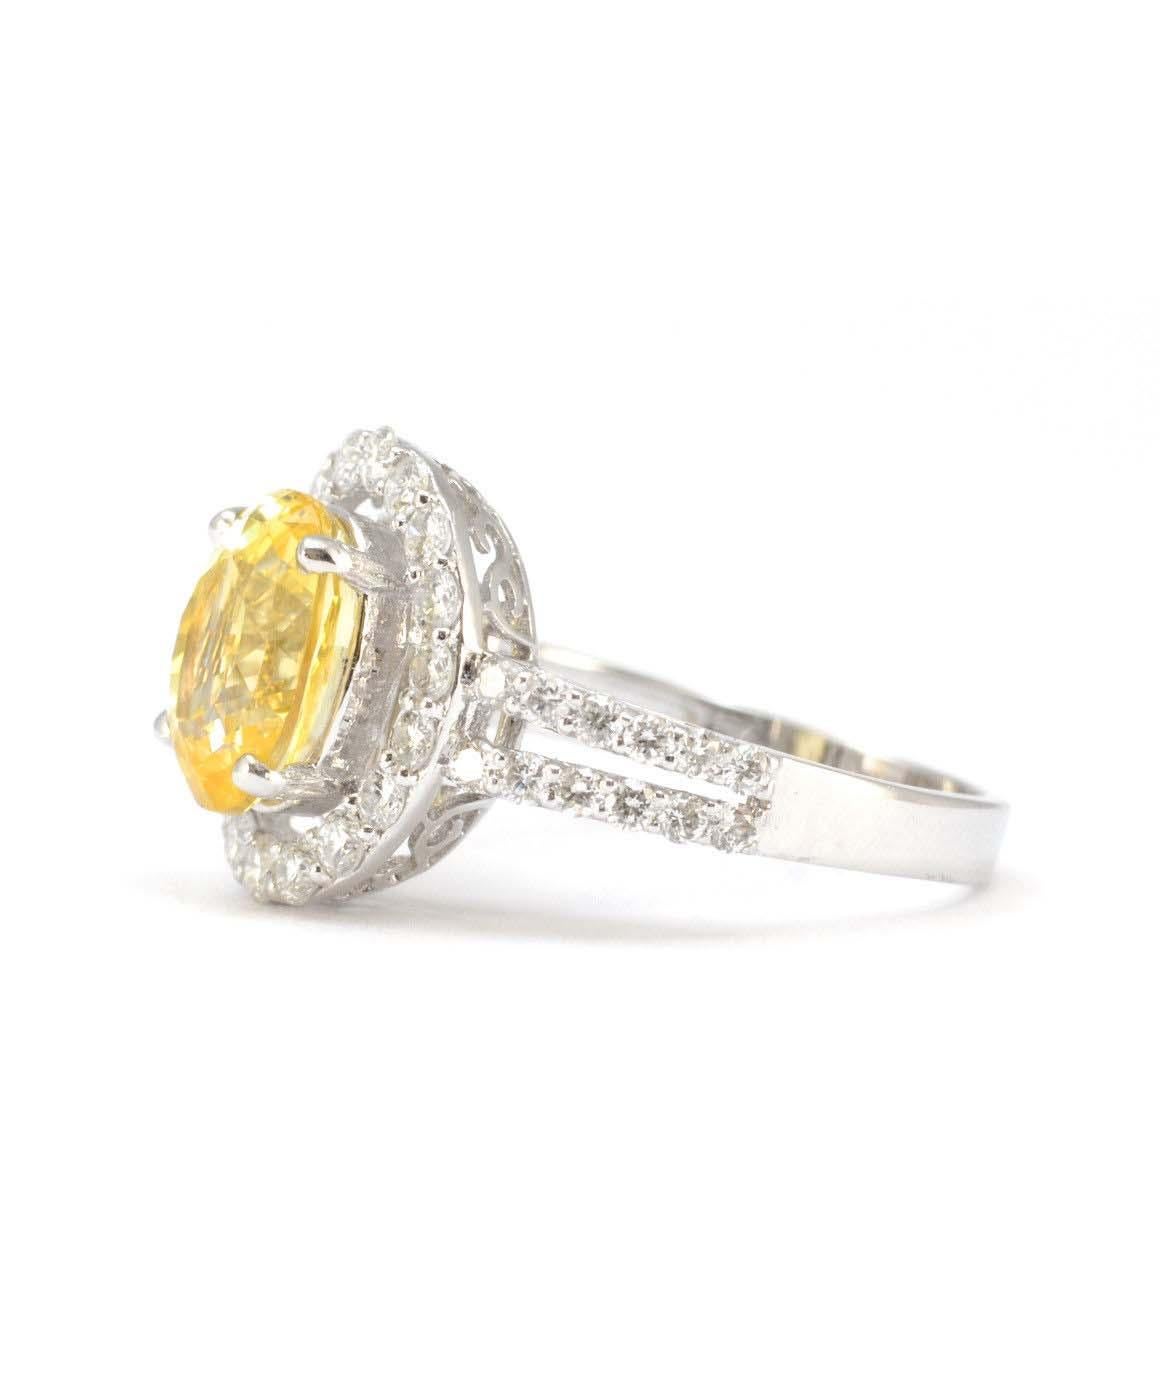 This is a gorgeous genuine yellow sapphire & natural diamond ring in excellent condition! The oval yellow sapphire measures 9.96mm X 7.96mm approximately. There are 18 round brilliant diamonds in the halo, F VS weighing approximately 0.55CTTW. There